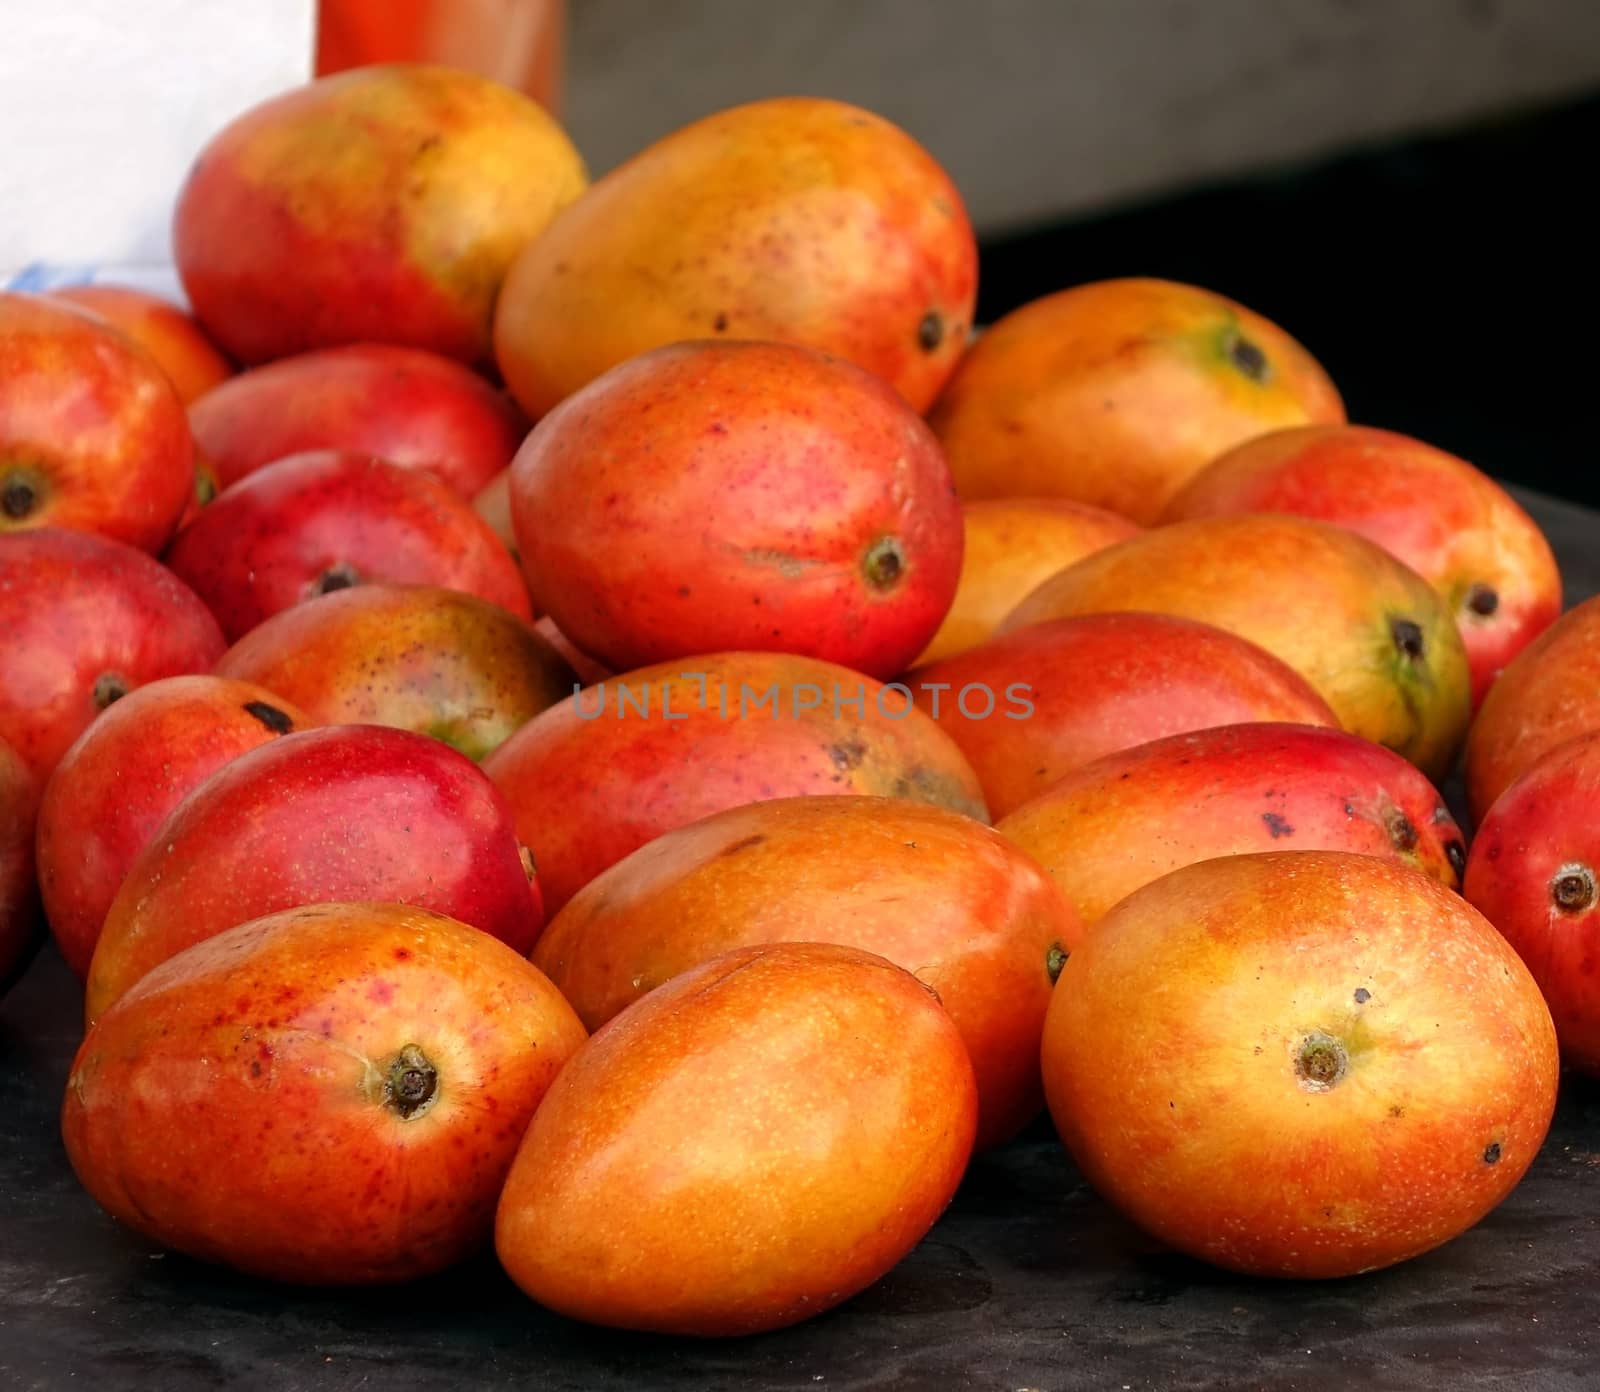 Ripe Red Mangoes for Sale by shiyali